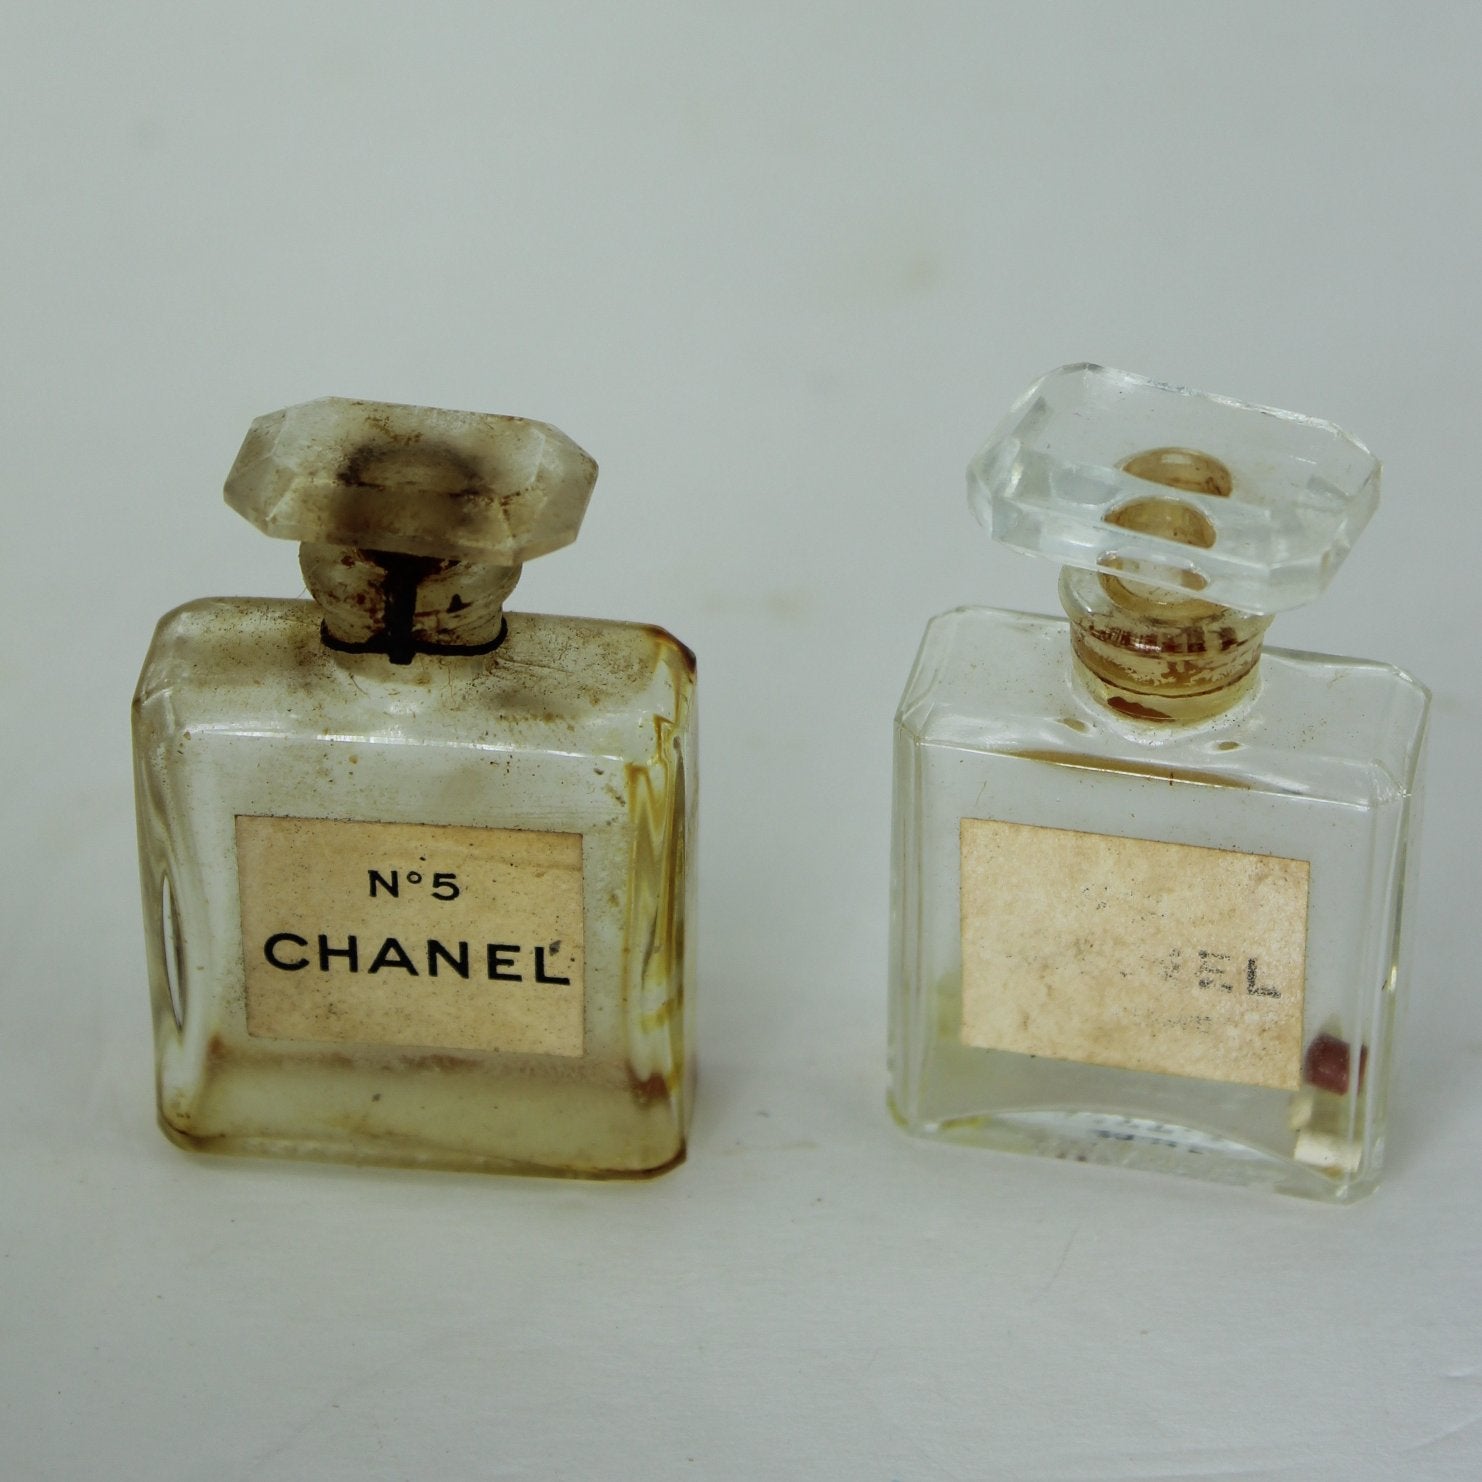 VINTAGE PERFUME BOTTLE CHANEL No 5 MADE IN FRANCE COLLECTIBLES